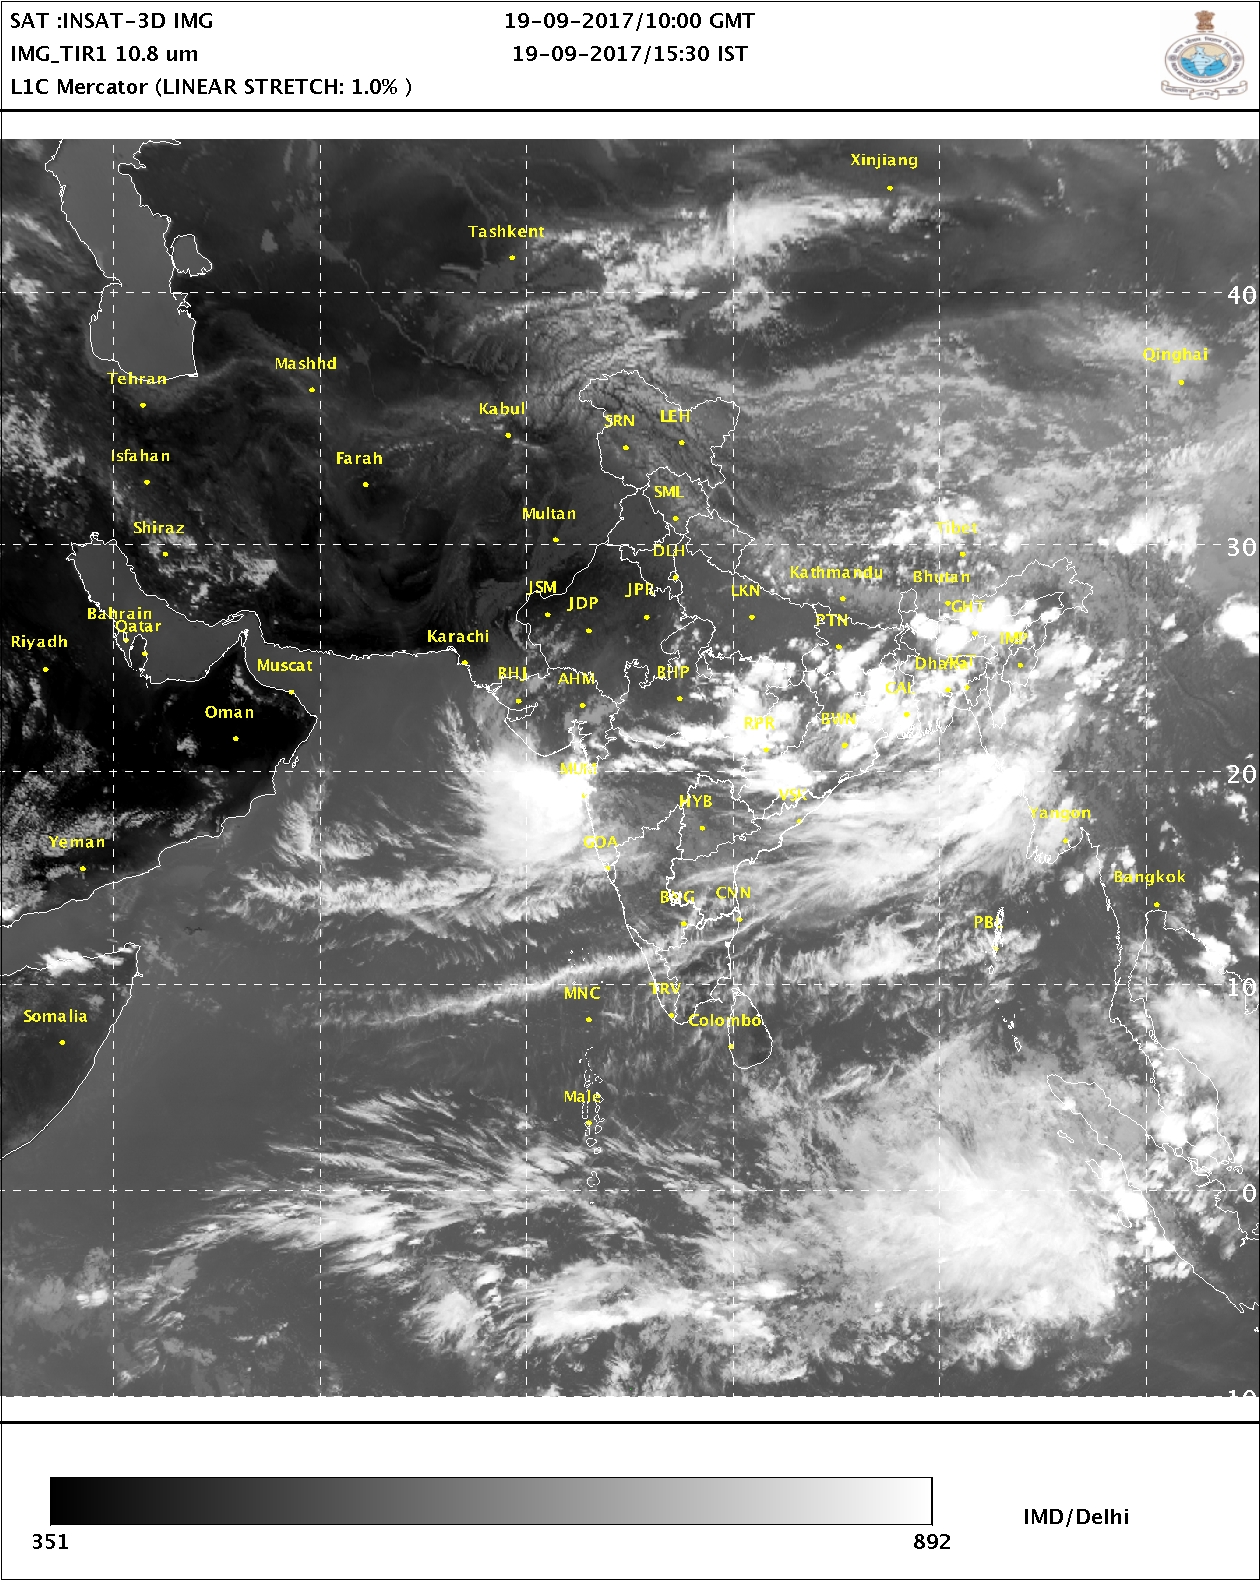 Satellite Picture 03:30 pm showing cloud bands over Mumbai. Source: IMD